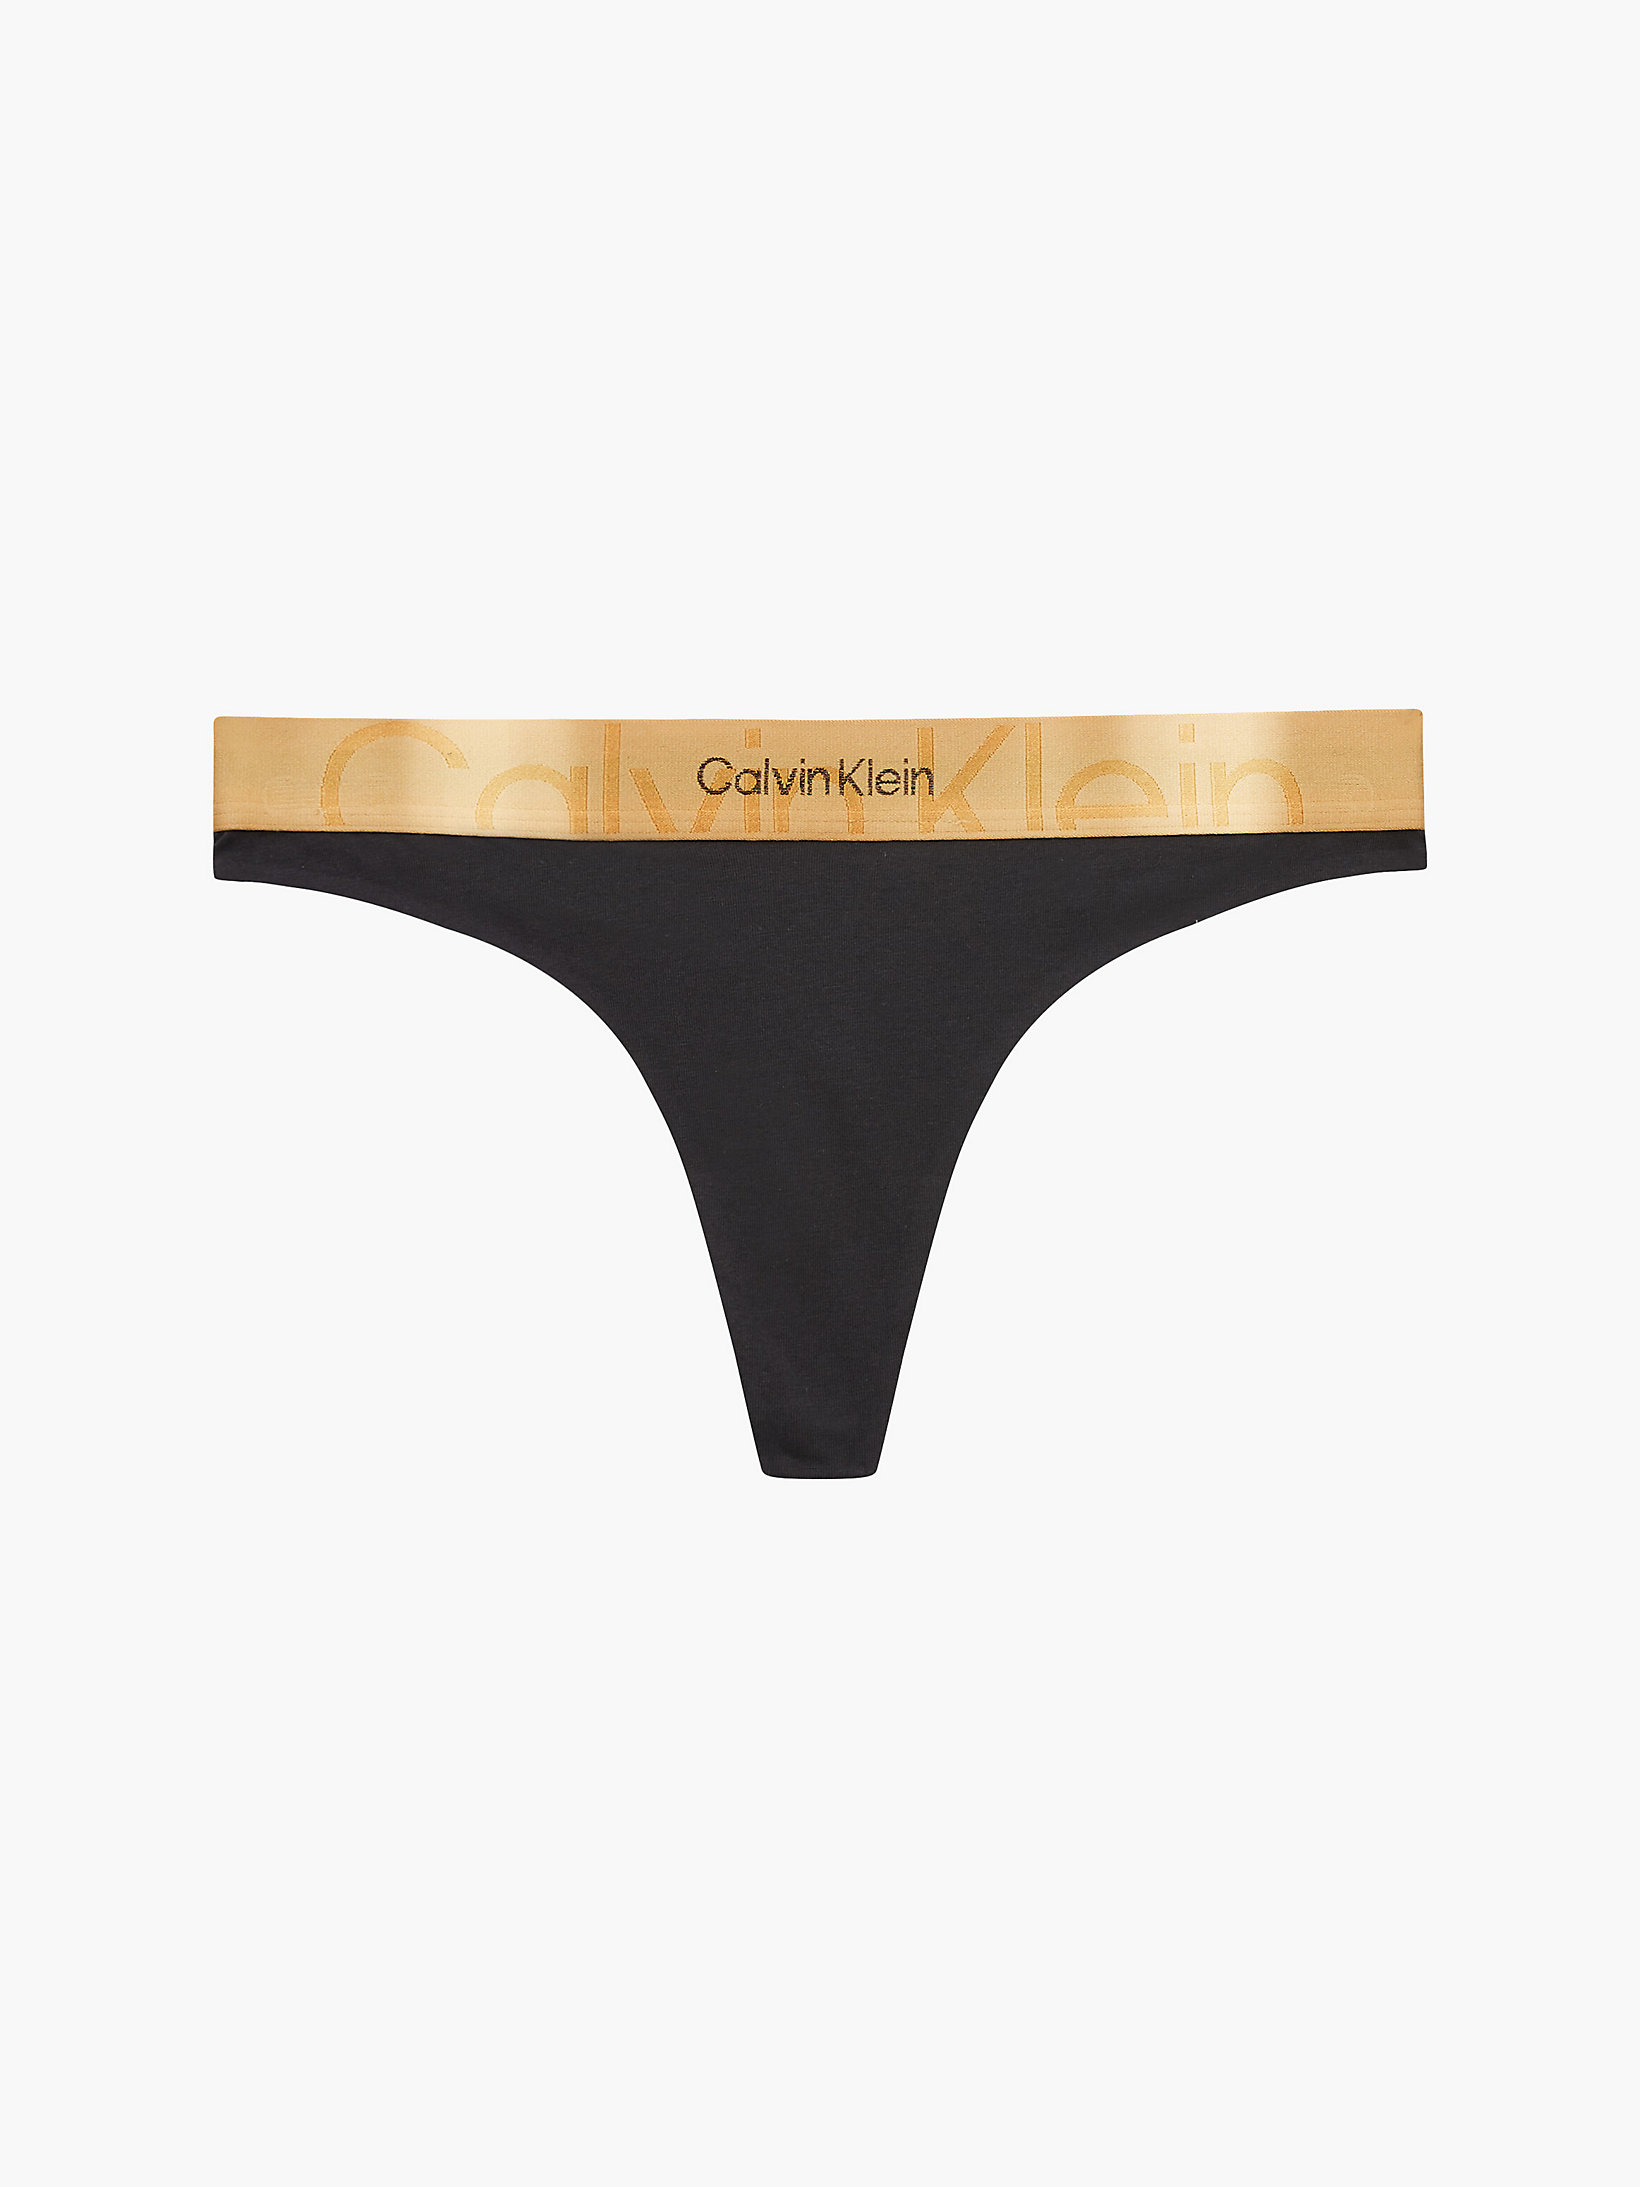 Tanga - Embossed Icon > Black W. Old Gold Wsb > undefined mujer > Calvin Klein